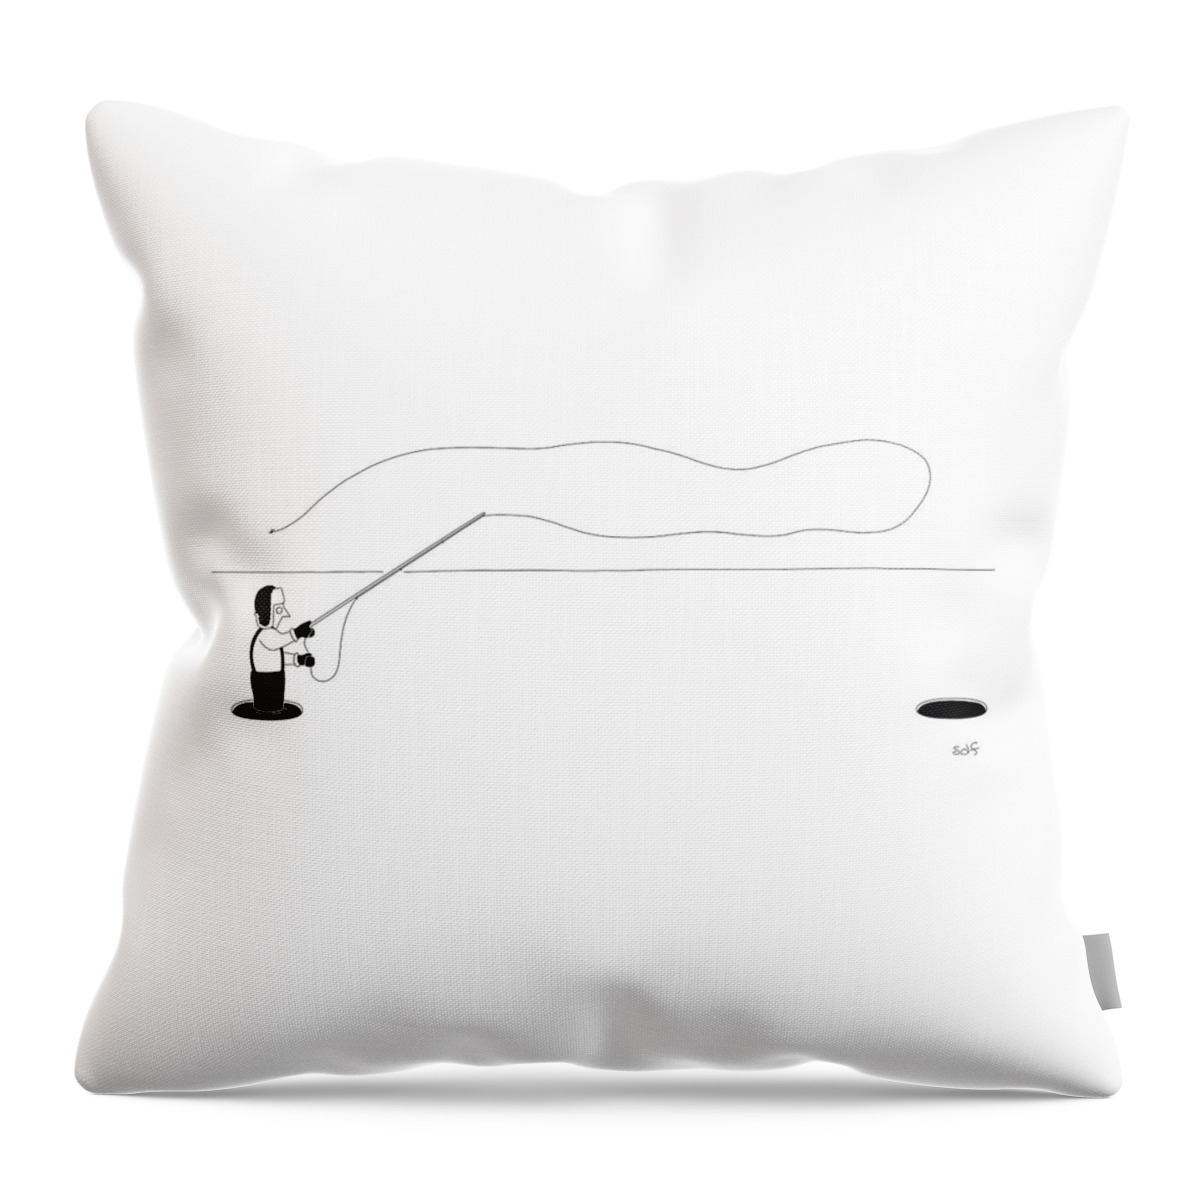 New Yorker March 15, 2021 Throw Pillow